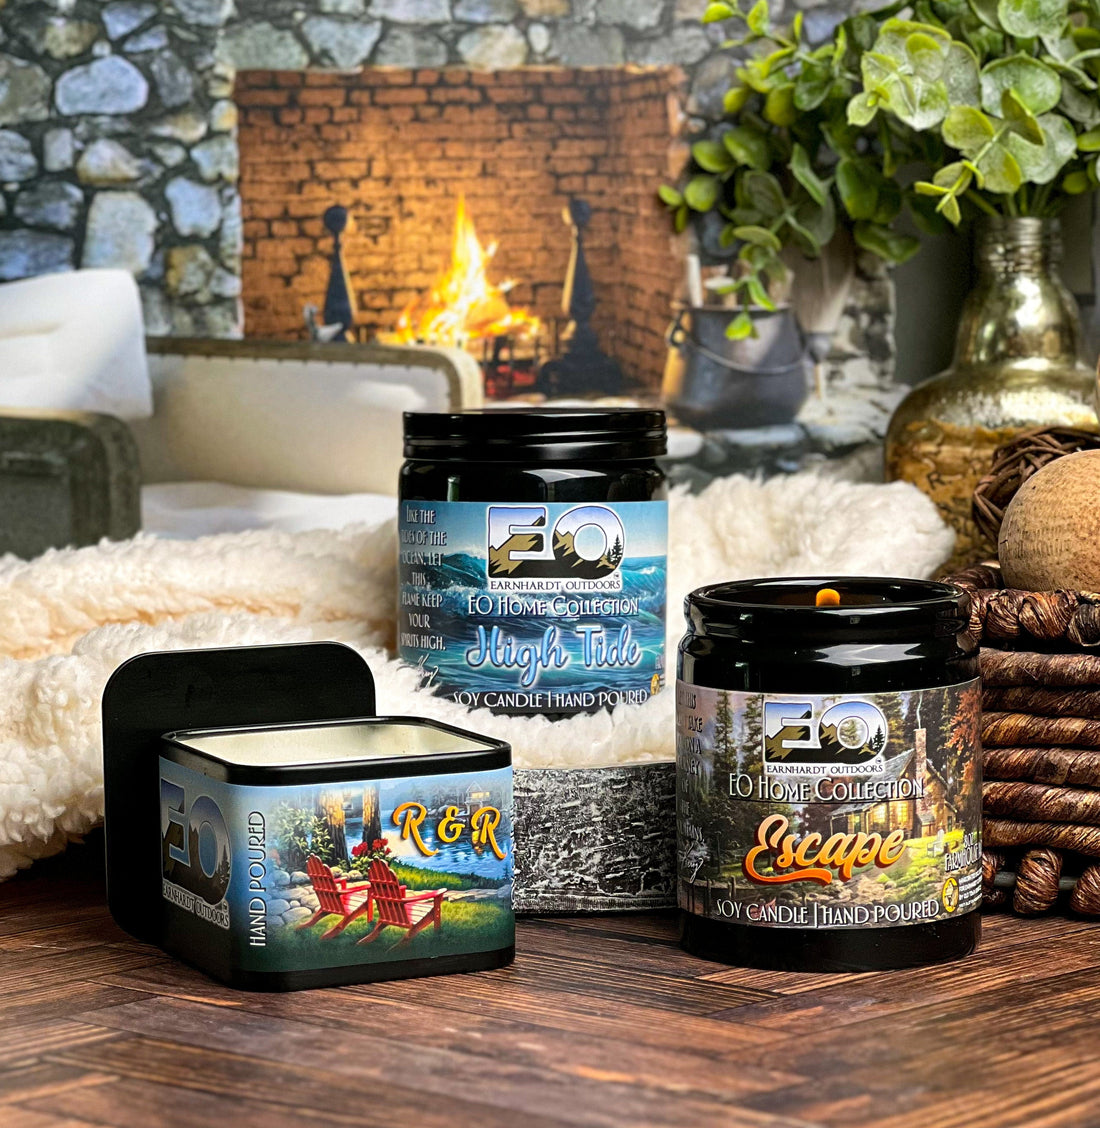 Escape Candle EO Home Collection - Old Town Soap Co.